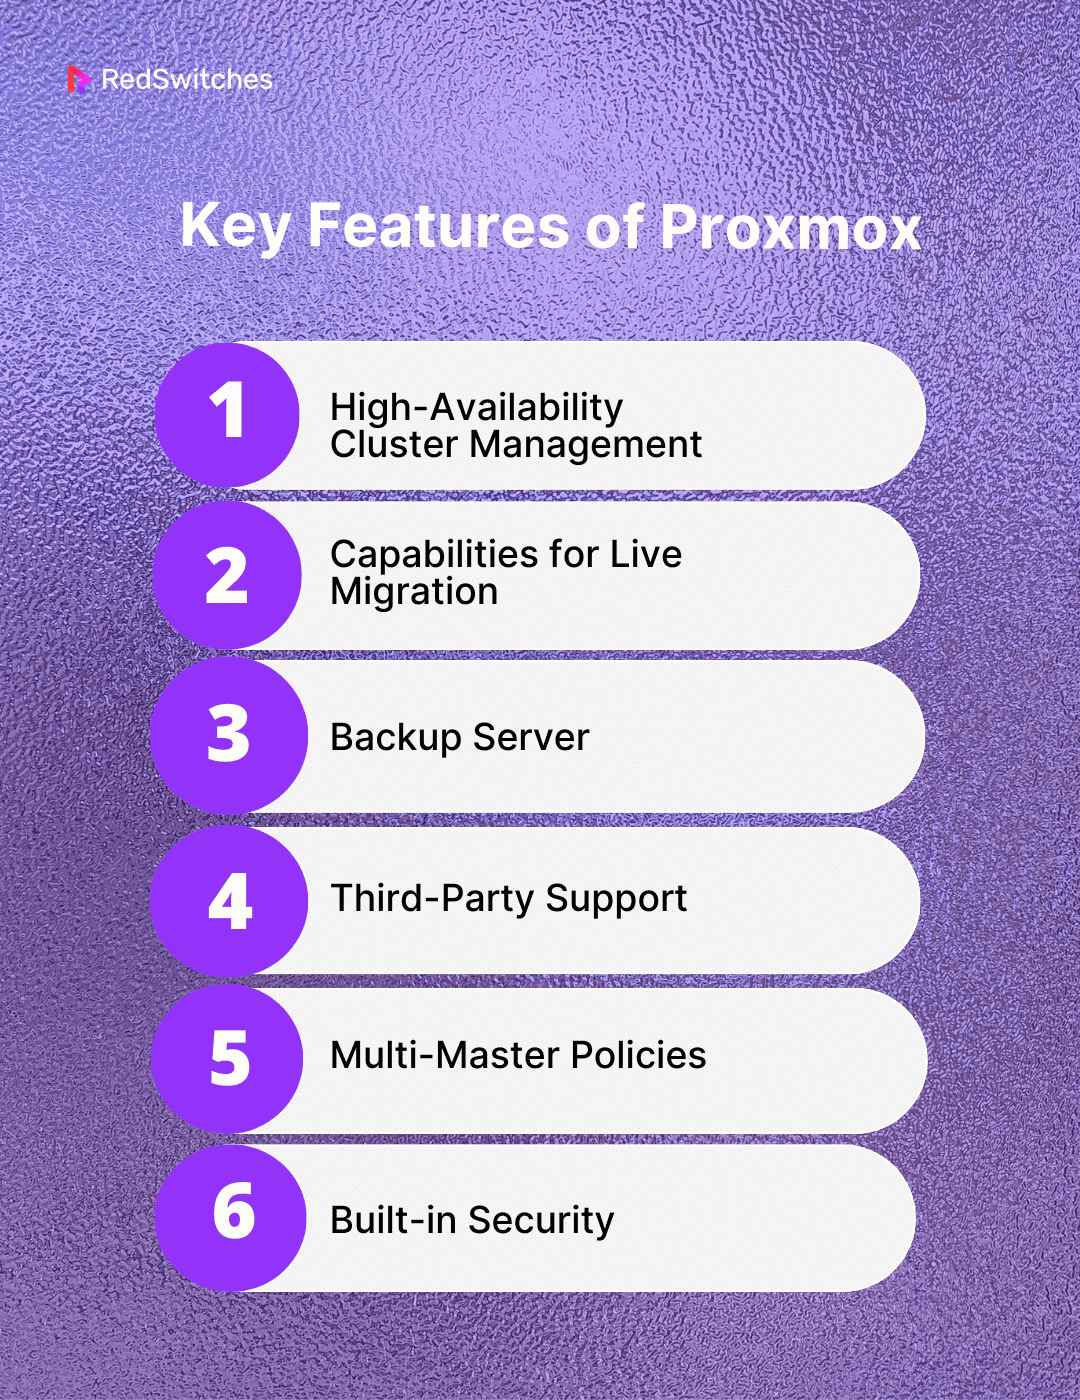 Key Features of Proxmox